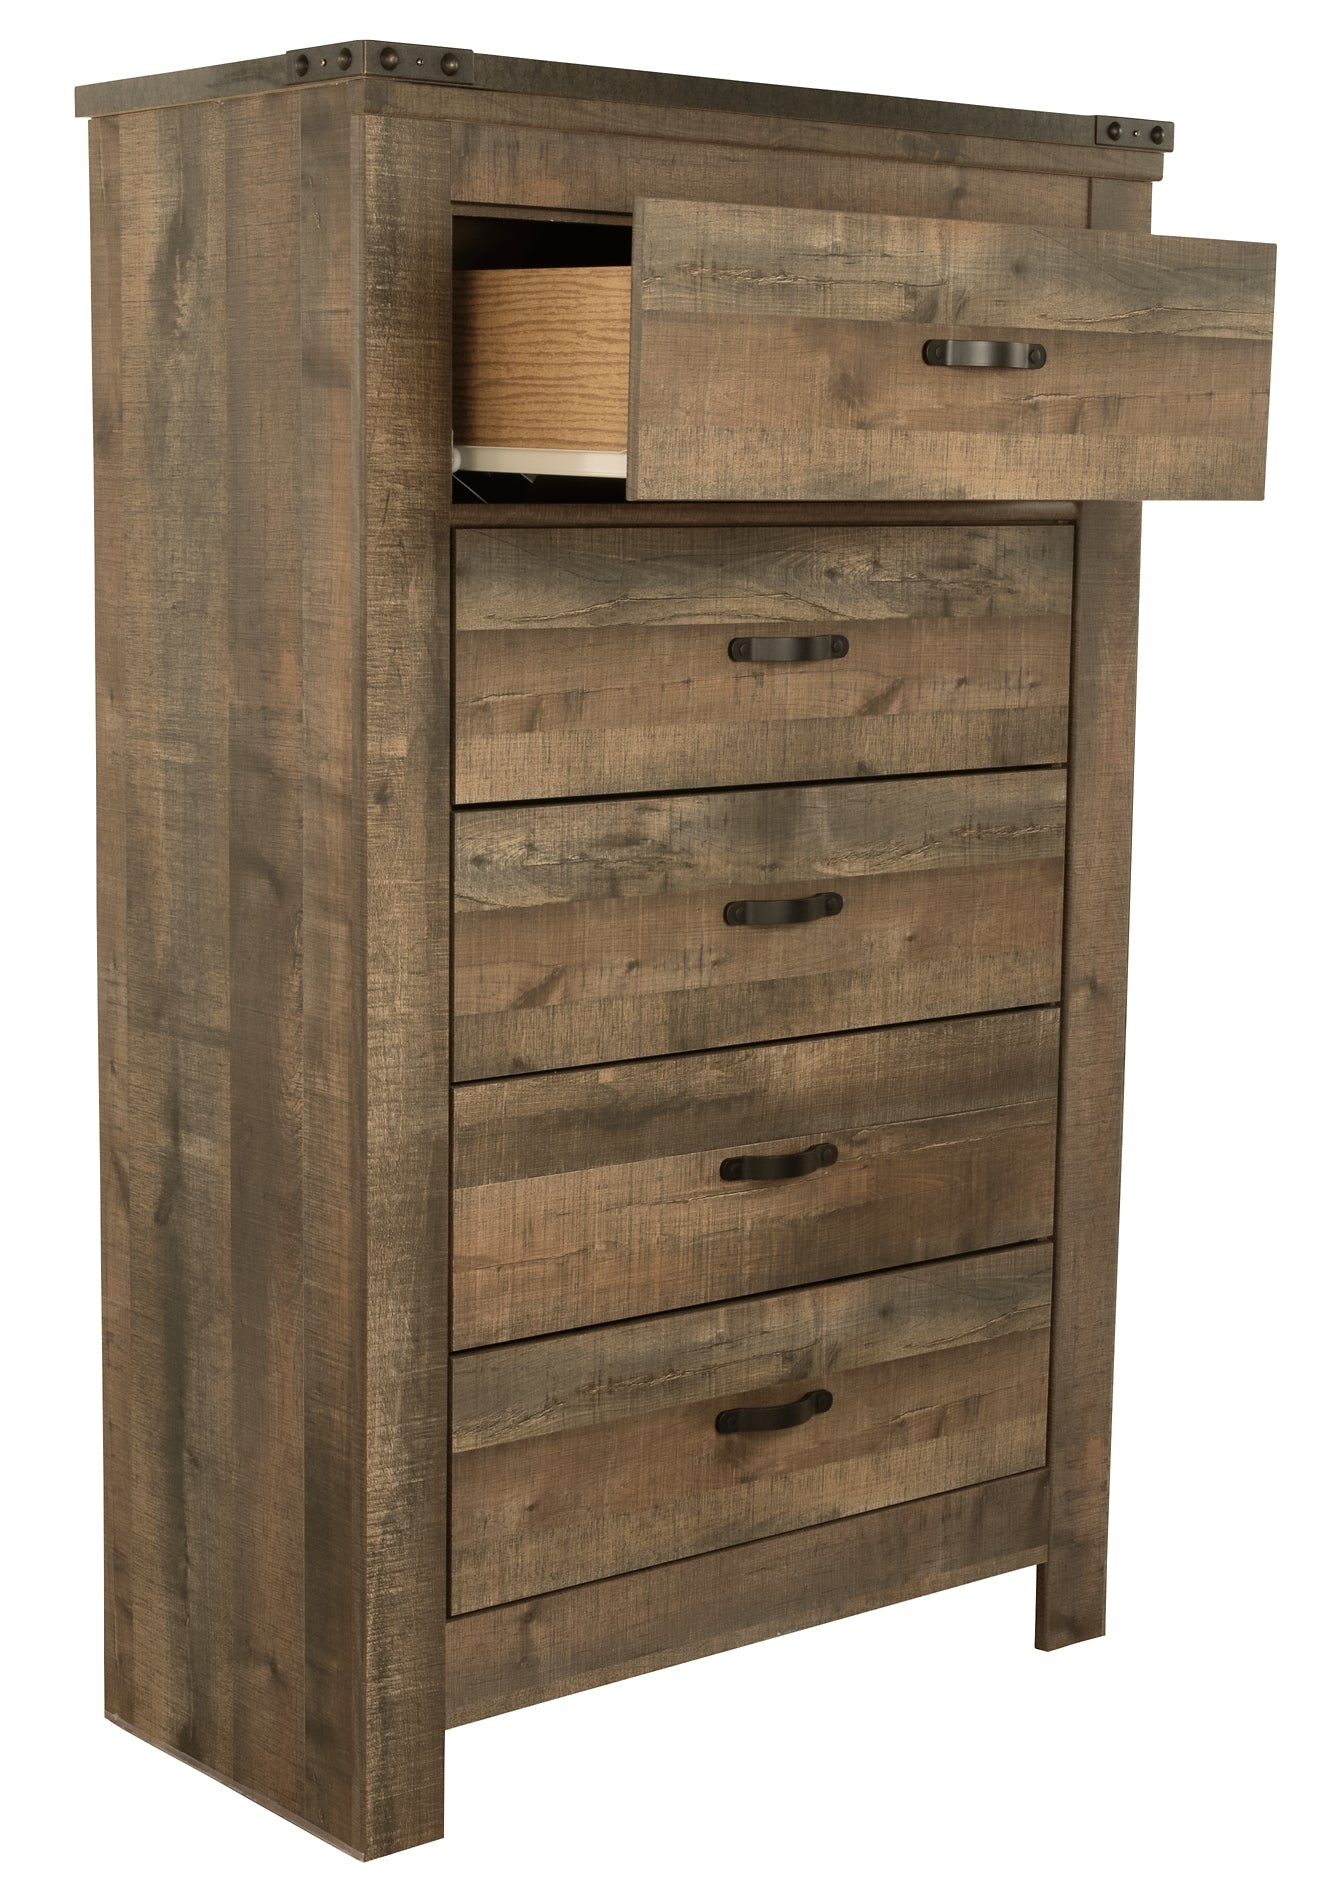 Trinell Five Drawer Chest